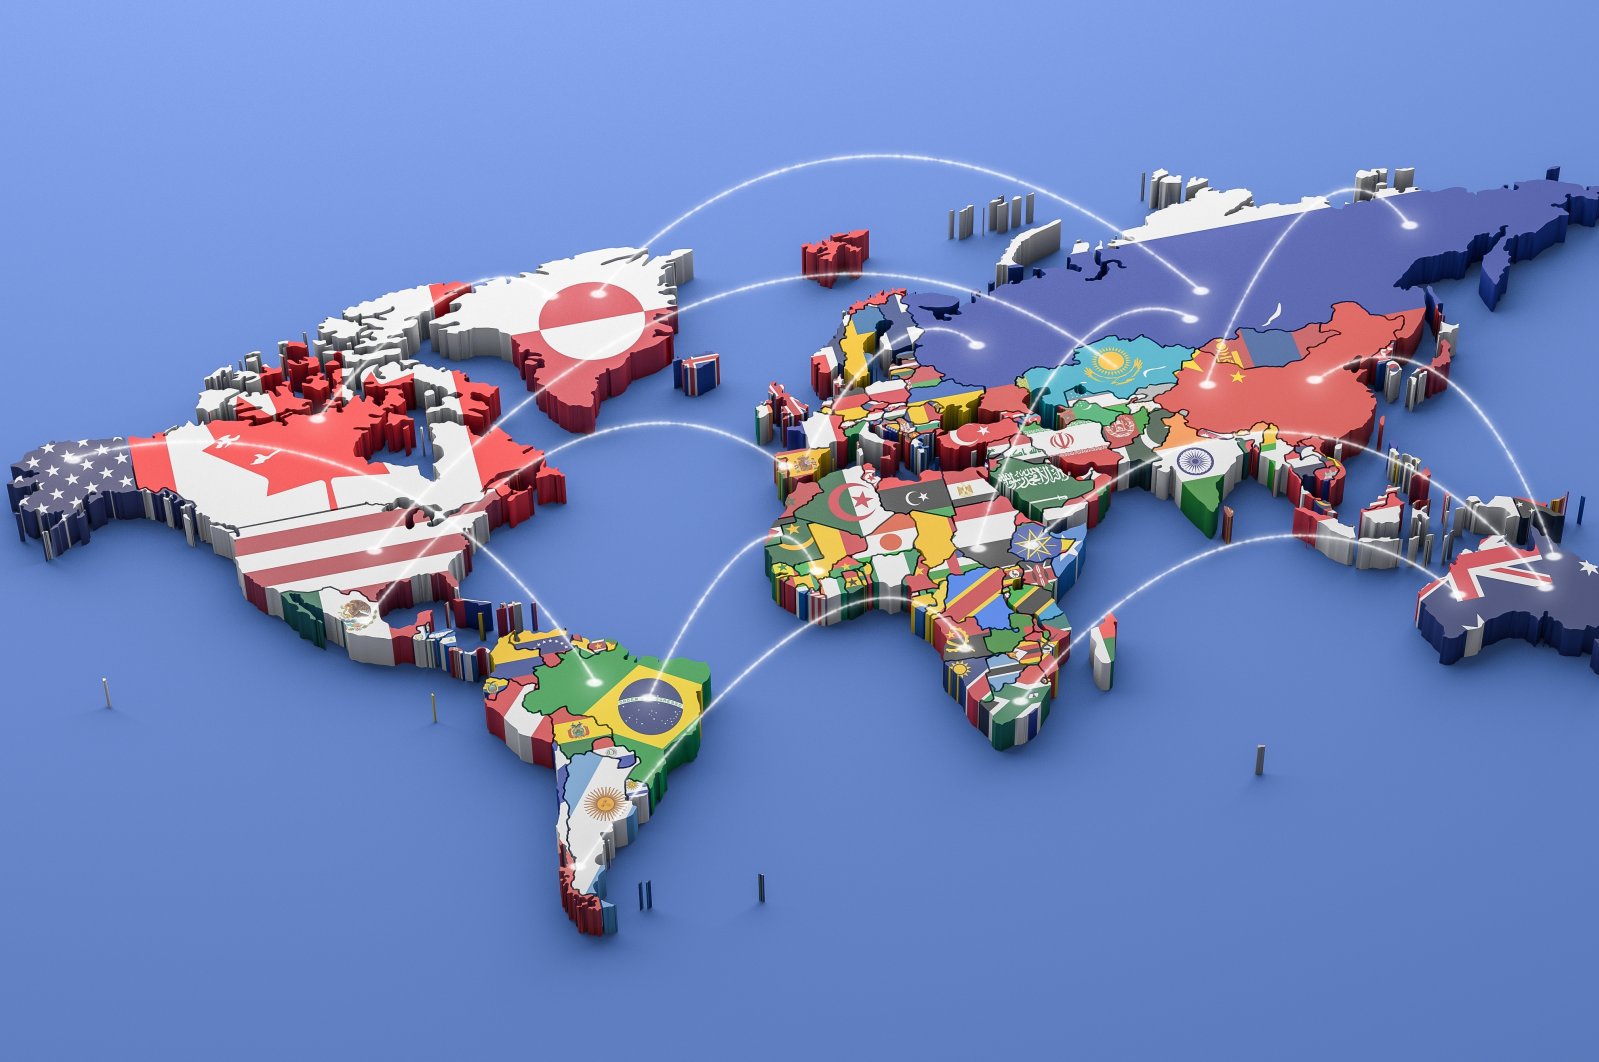 A photo illustration of the world map featuring the flags of nations. (Photo by Shutterstock)